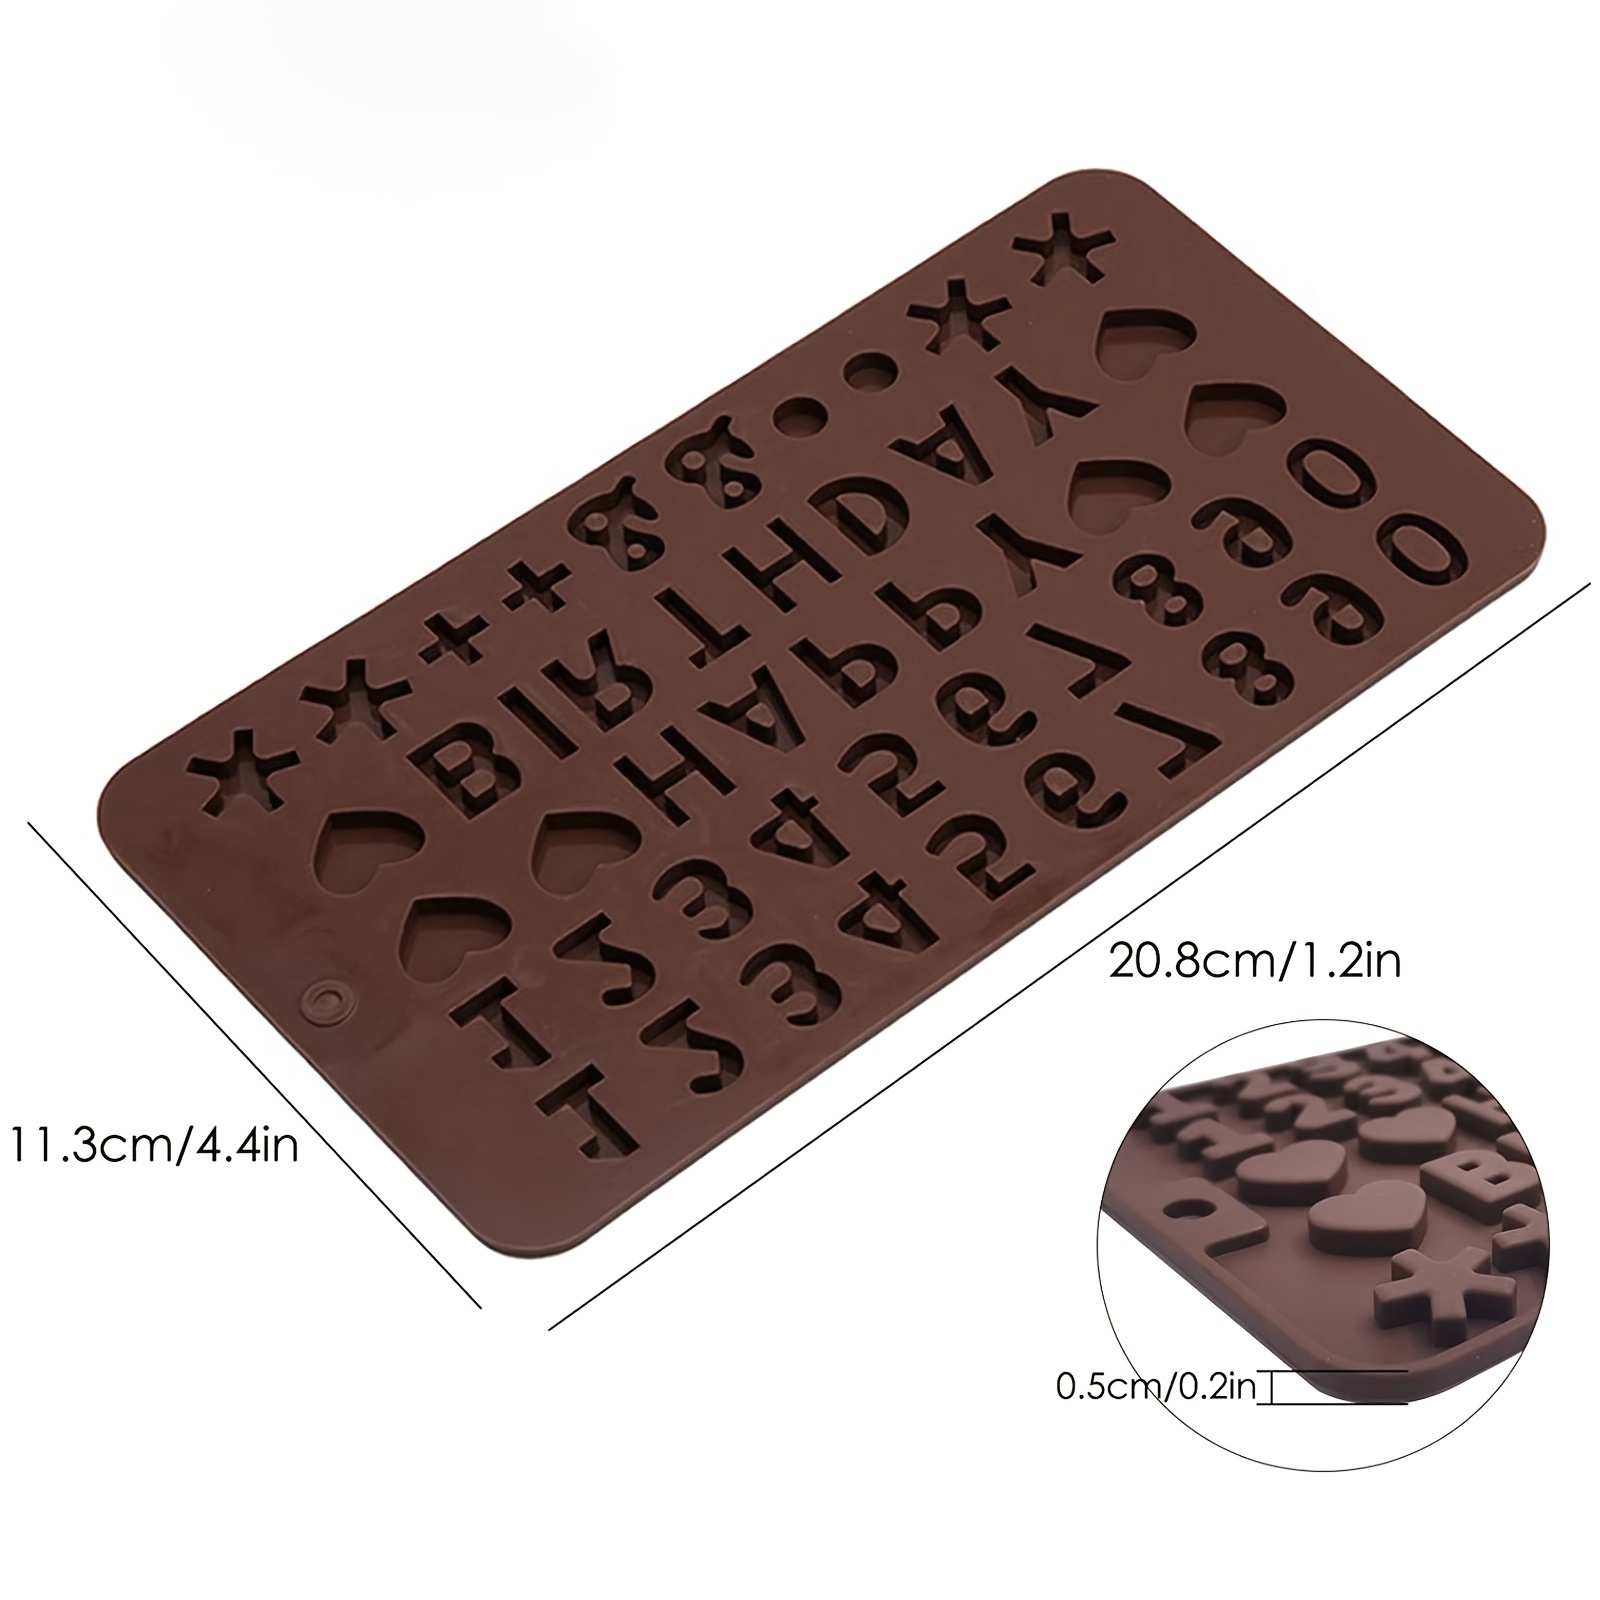  Candy Molds Silicone Chocolate Molds No-Stick Molds